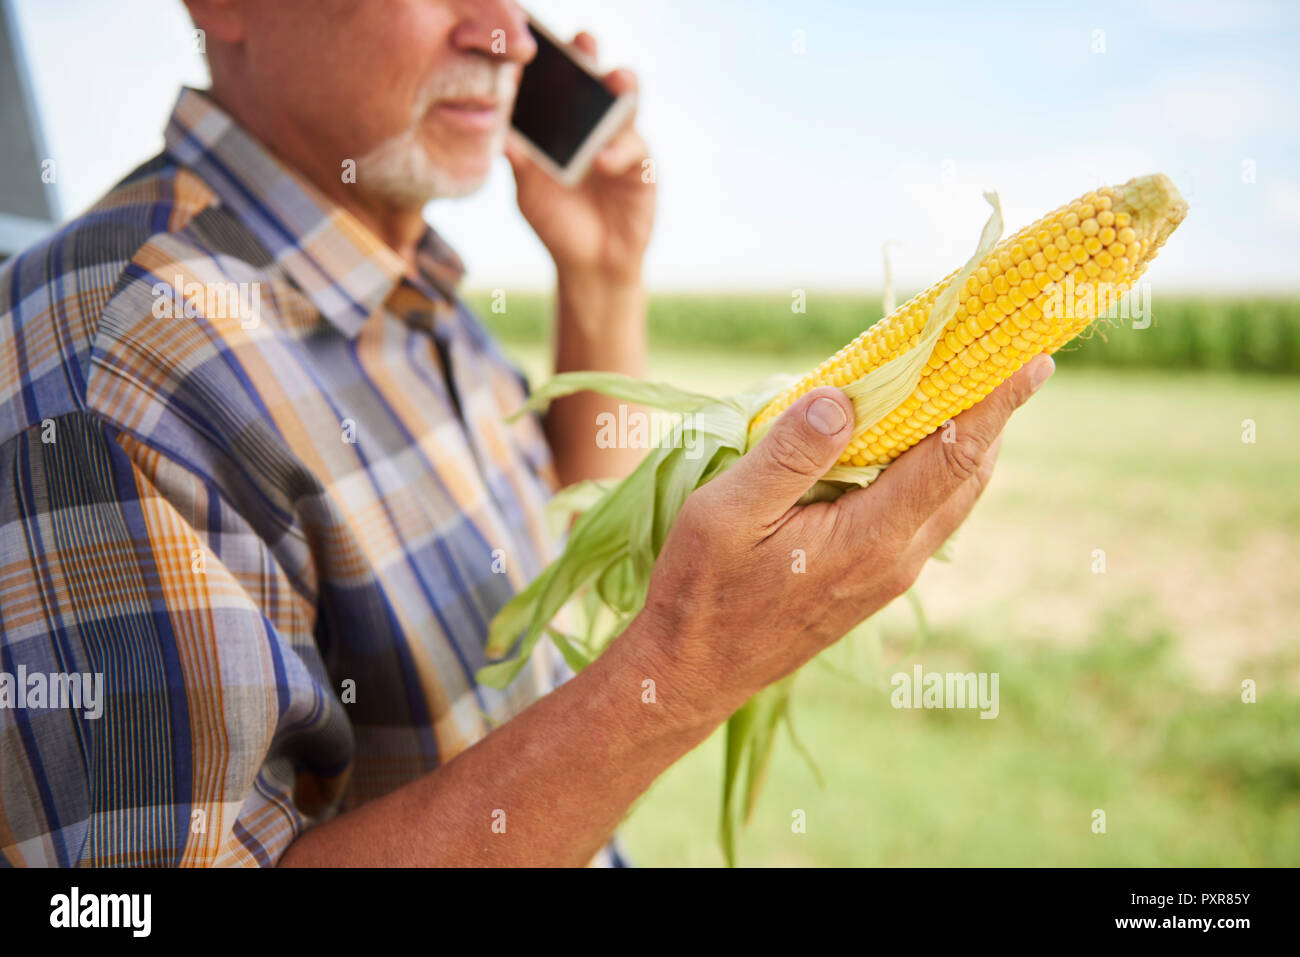 Farmer holding corn cob and talking on cell phone on field Stock Photo